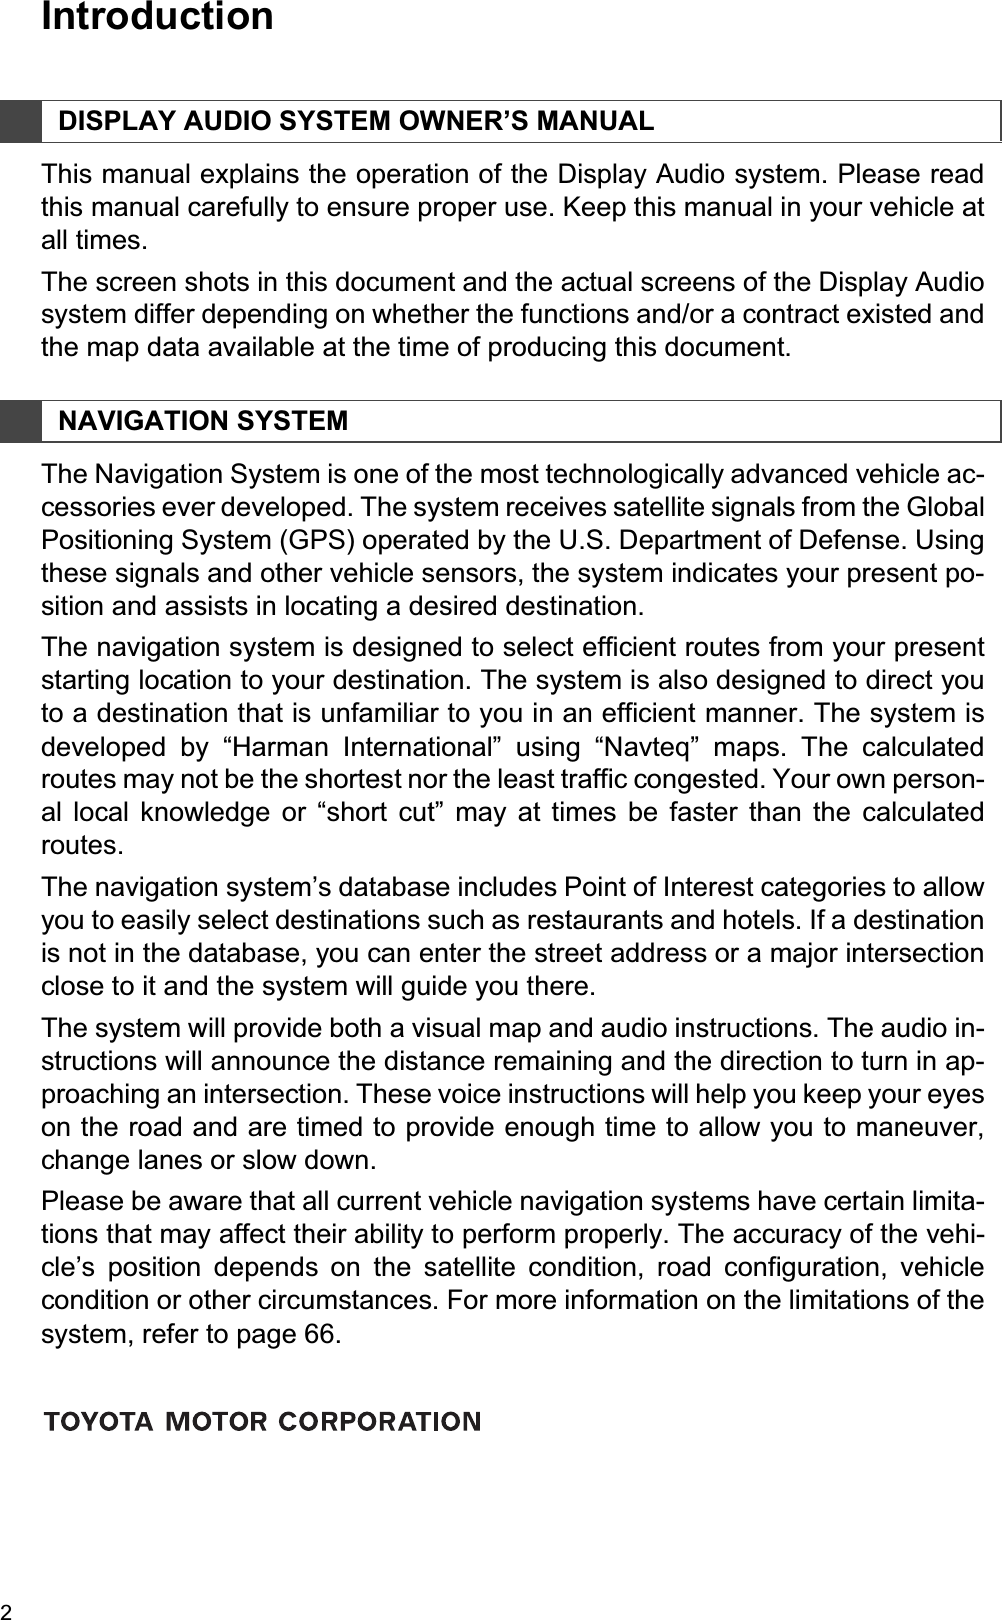 21. BASIC INFORMATION BEFORE OPERATIONIntroductionThis manual explains the operation of the Display Audio system. Please readthis manual carefully to ensure proper use. Keep this manual in your vehicle atall times.The screen shots in this document and the actual screens of the Display Audiosystem differ depending on whether the functions and/or a contract existed andthe map data available at the time of producing this document.The Navigation System is one of the most technologically advanced vehicle ac-cessories ever developed. The system receives satellite signals from the GlobalPositioning System (GPS) operated by the U.S. Department of Defense. Usingthese signals and other vehicle sensors, the system indicates your present po-sition and assists in locating a desired destination.The navigation system is designed to select efficient routes from your presentstarting location to your destination. The system is also designed to direct youto a destination that is unfamiliar to you in an efficient manner. The system isdeveloped by “Harman International” using “Navteq” maps. The calculatedroutes may not be the shortest nor the least traffic congested. Your own person-al local knowledge or “short cut” may at times be faster than the calculatedroutes.The navigation system’s database includes Point of Interest categories to allowyou to easily select destinations such as restaurants and hotels. If a destinationis not in the database, you can enter the street address or a major intersectionclose to it and the system will guide you there.The system will provide both a visual map and audio instructions. The audio in-structions will announce the distance remaining and the direction to turn in ap-proaching an intersection. These voice instructions will help you keep your eyeson the road and are timed to provide enough time to allow you to maneuver,change lanes or slow down.Please be aware that all current vehicle navigation systems have certain limita-tions that may affect their ability to perform properly. The accuracy of the vehi-cle’s position depends on the satellite condition, road configuration, vehiclecondition or other circumstances. For more information on the limitations of thesystem, refer to page 66.DISPLAY AUDIO SYSTEM OWNER’S MANUALNAVIGATION SYSTEM